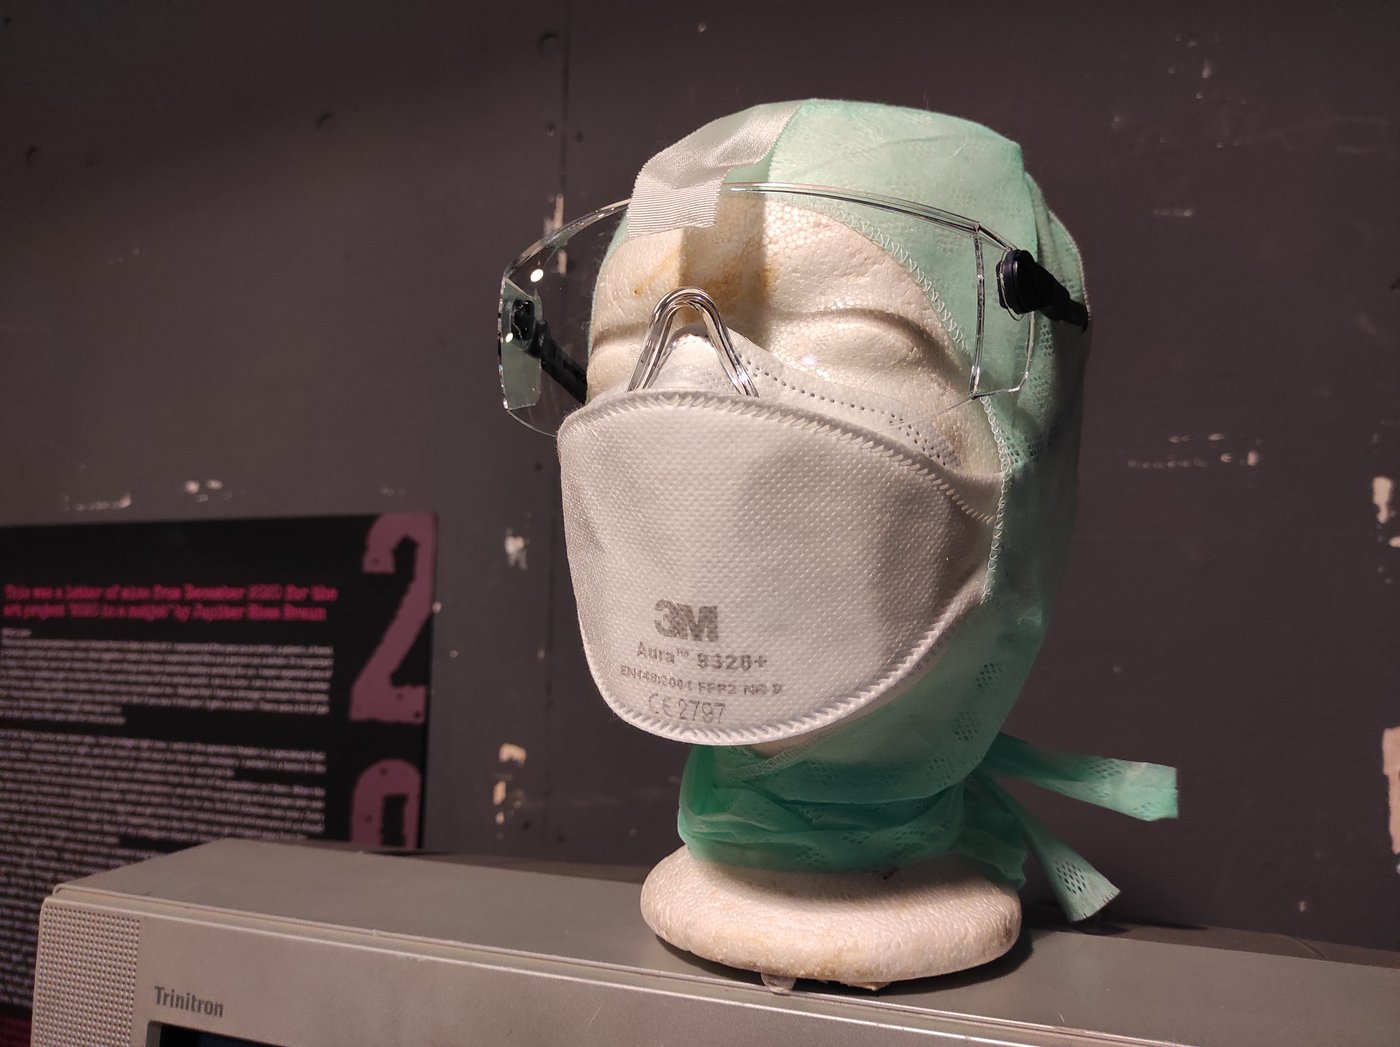 A Styrofoam head with FFP2 mask, goggles and head protection stands on a Triniton monitor.